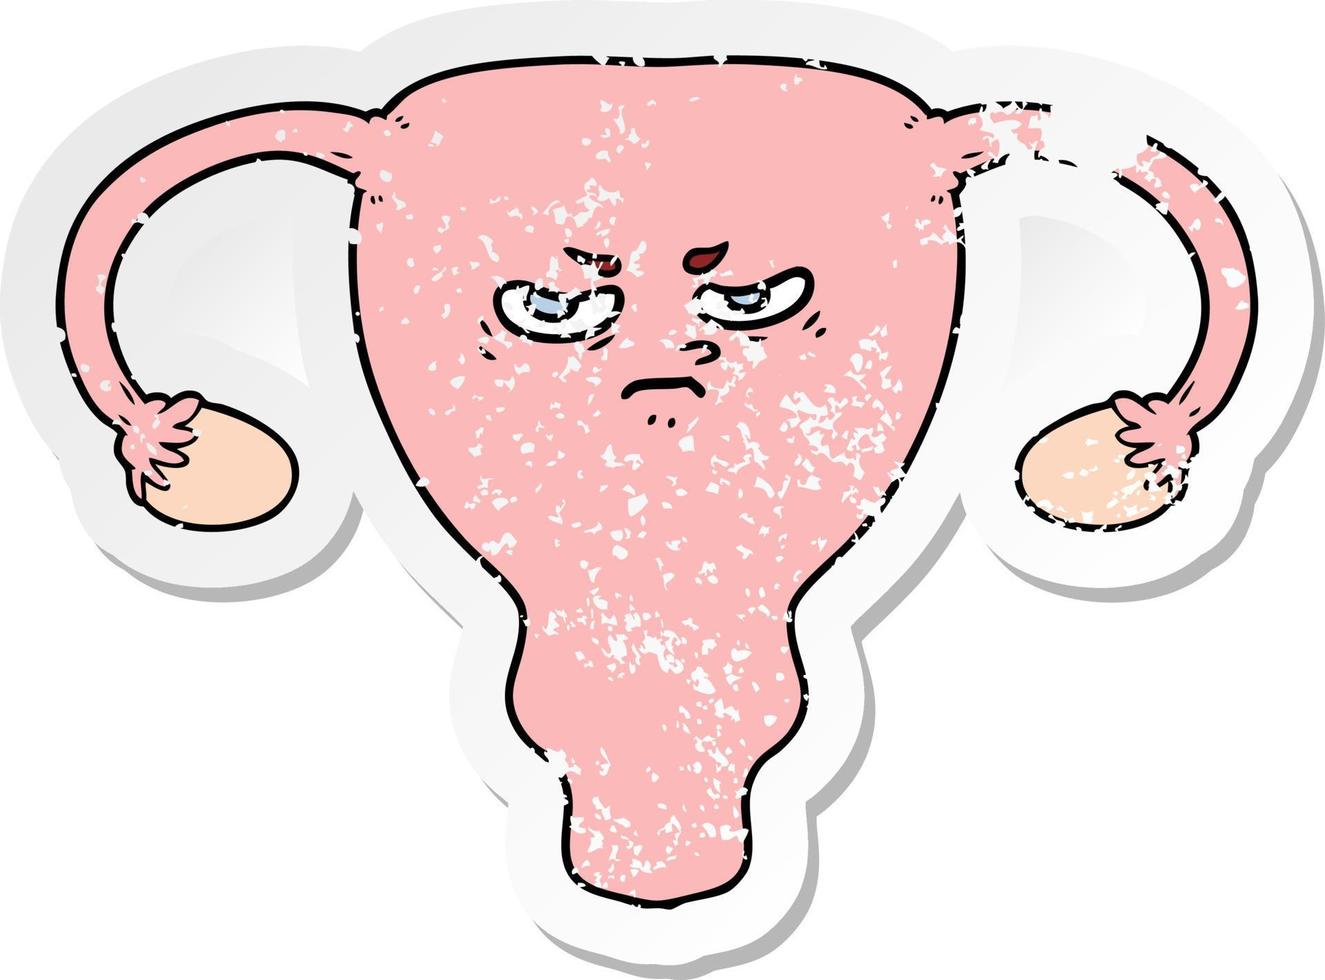 distressed sticker of a cartoon angry uterus vector